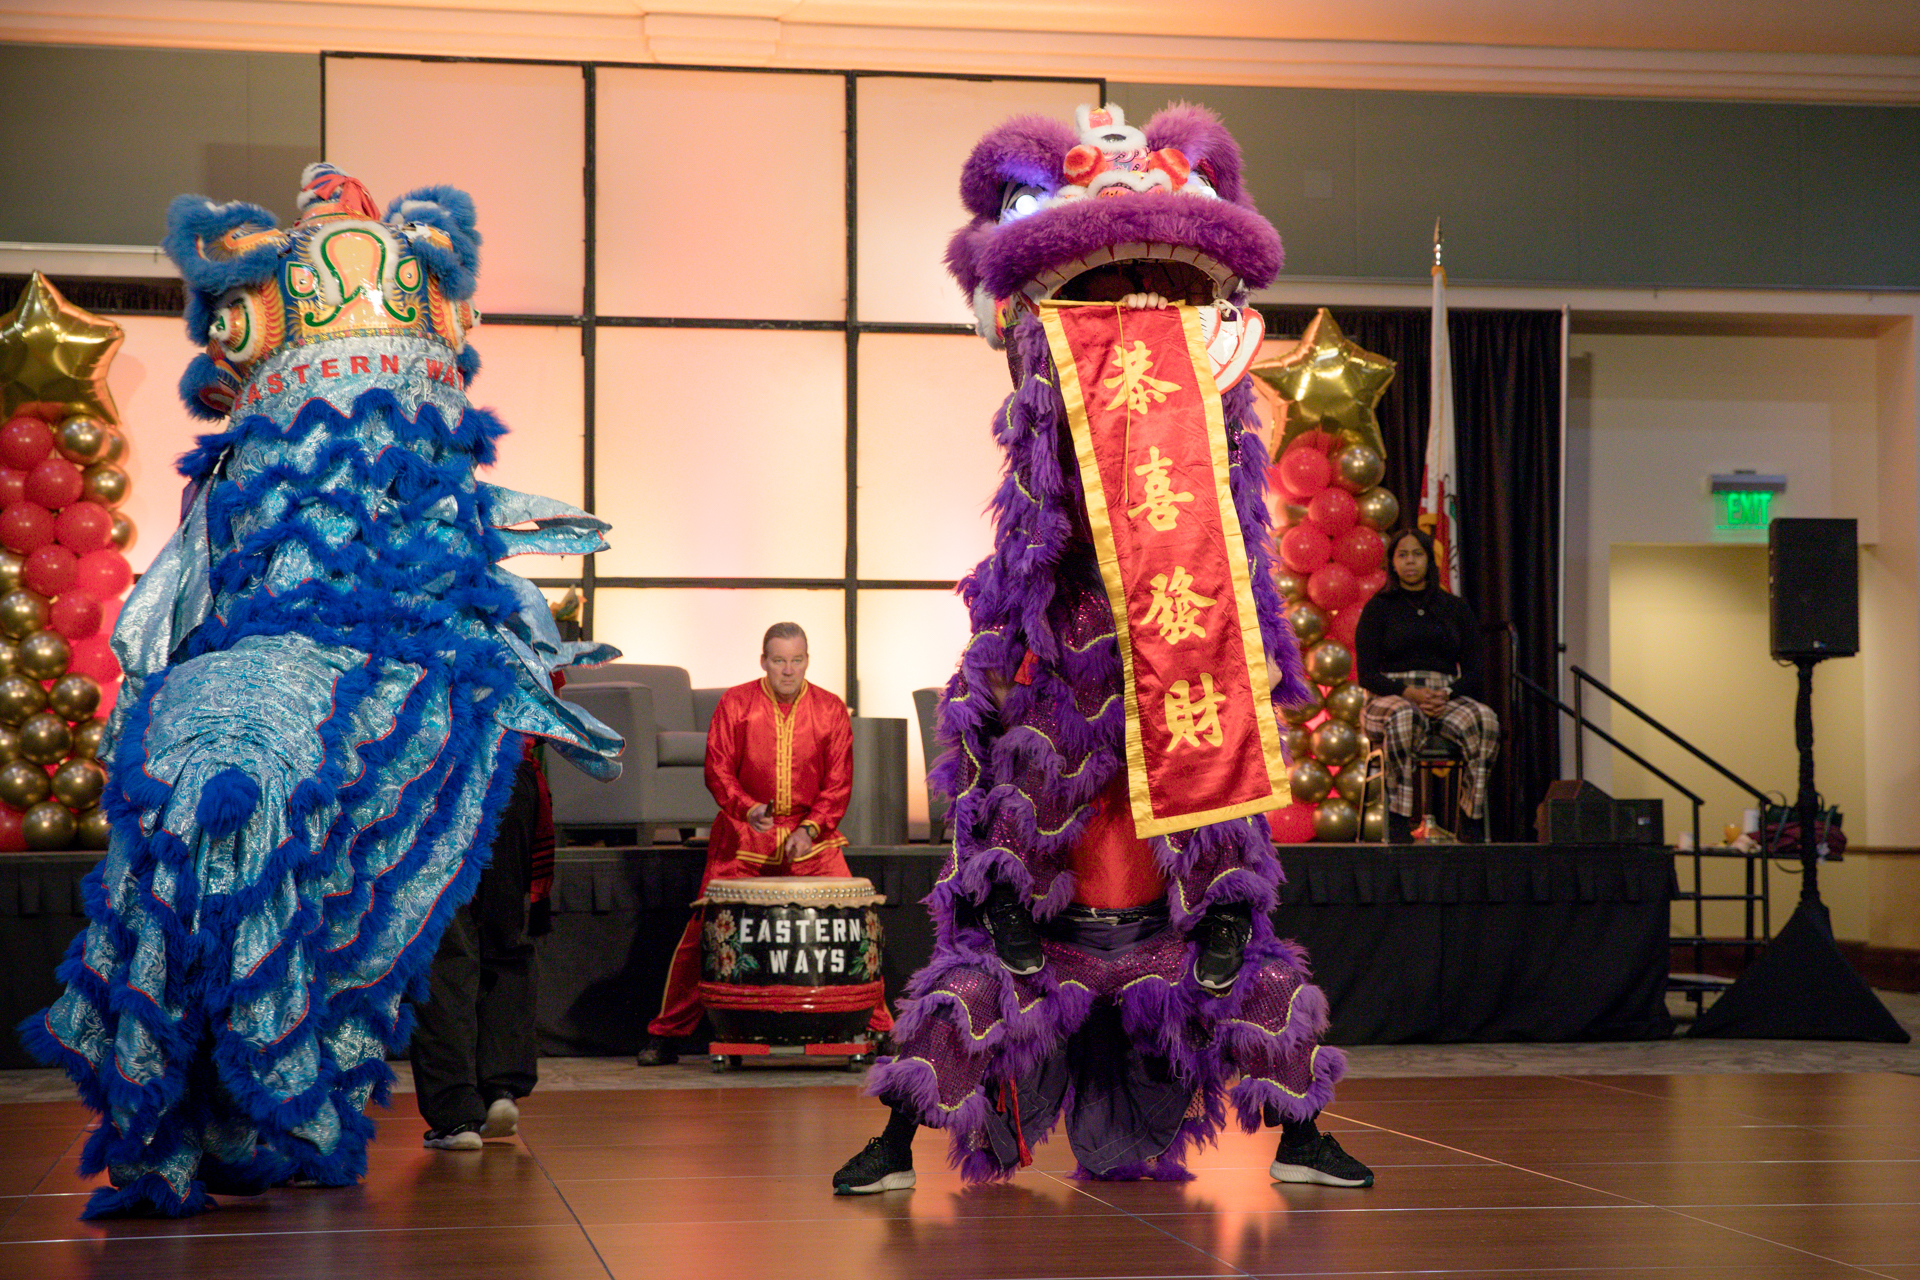 Performers dressed in dragon costumes dance at the APIDA Center grand opening.